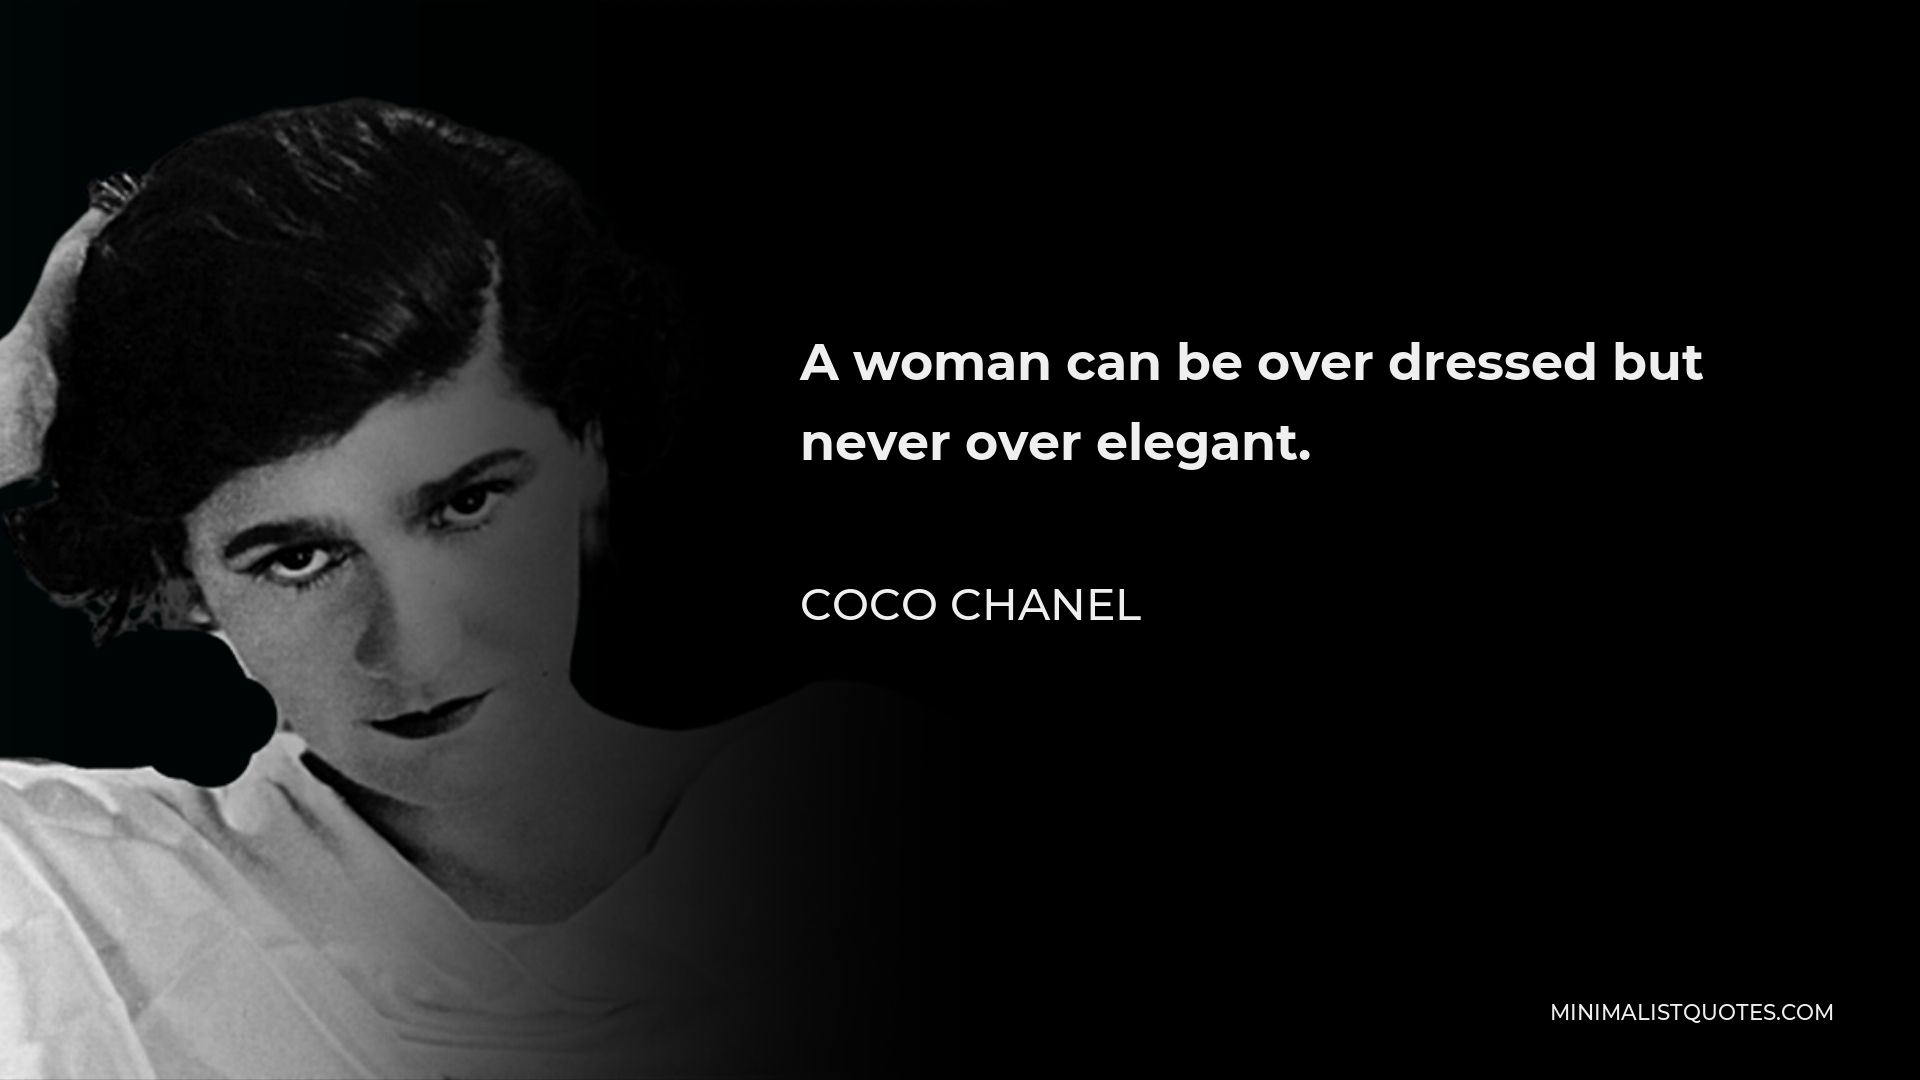 Coco Chanel Quote - A woman can be over dressed but never over elegant.